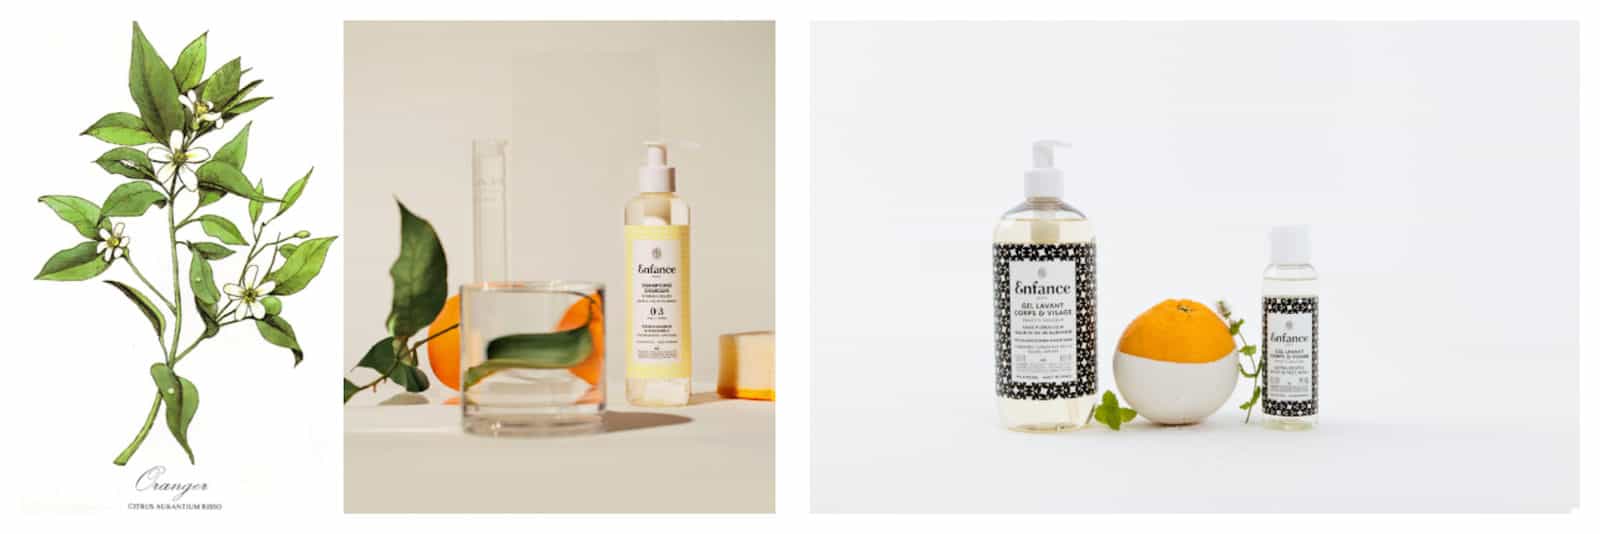 French beauty brand store in Paris, Oh My Cream! stocks organic Enfance products made with natural ingredients like zesty orange for the whole family.